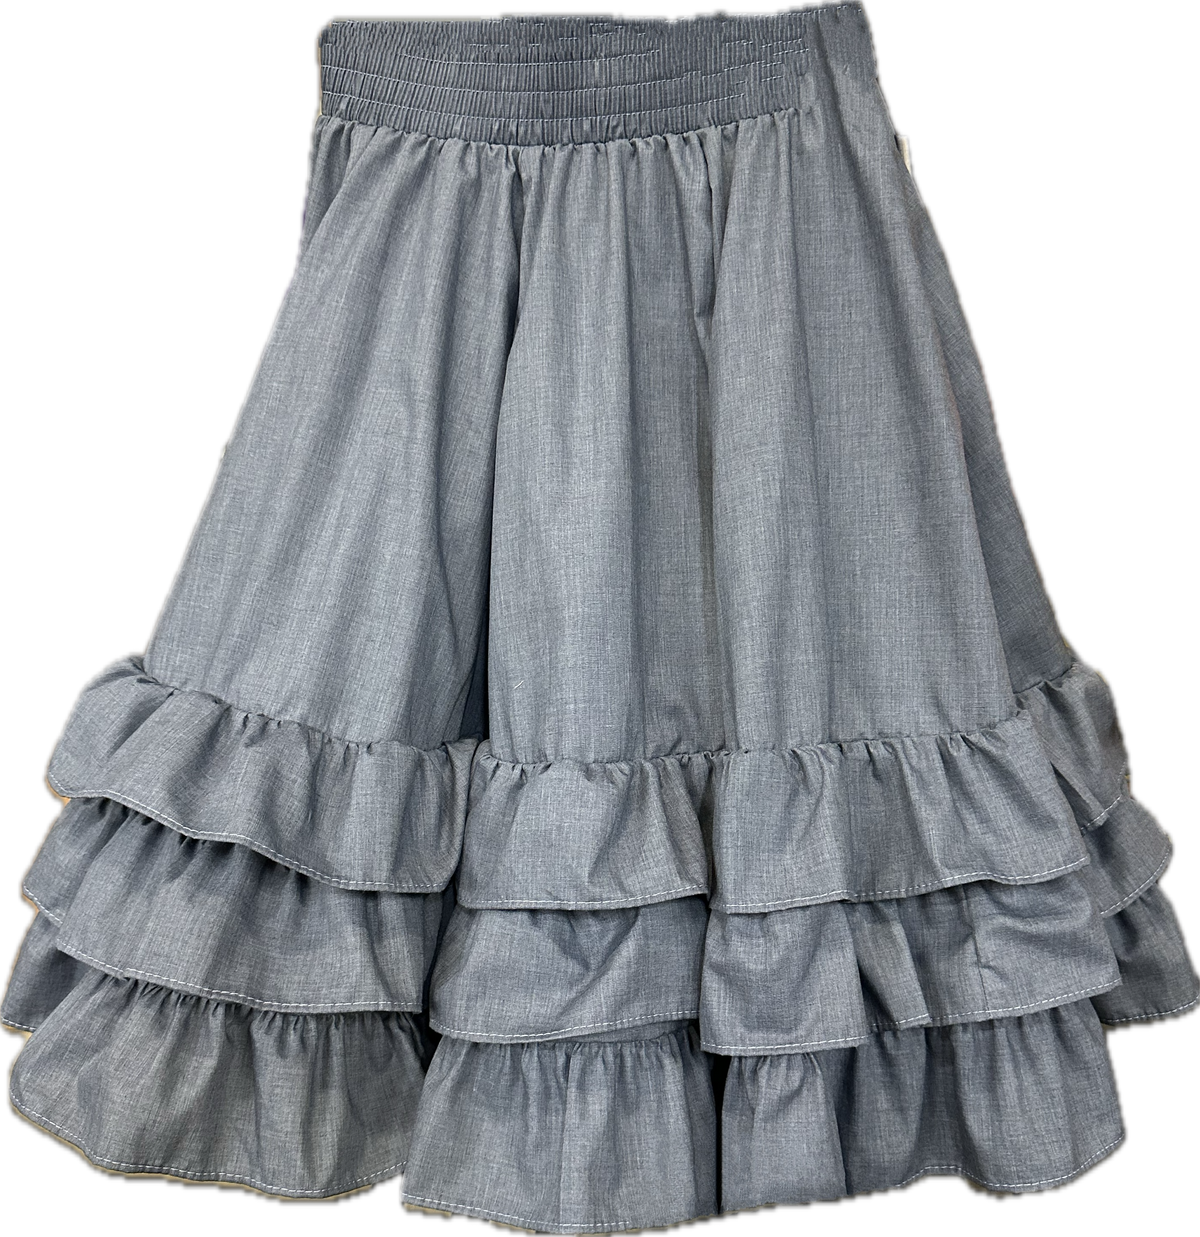 An eight gore 3 Ruffle Square Dance Skirt with solid ruffles, available in custom sizes by Square Up Fashions.